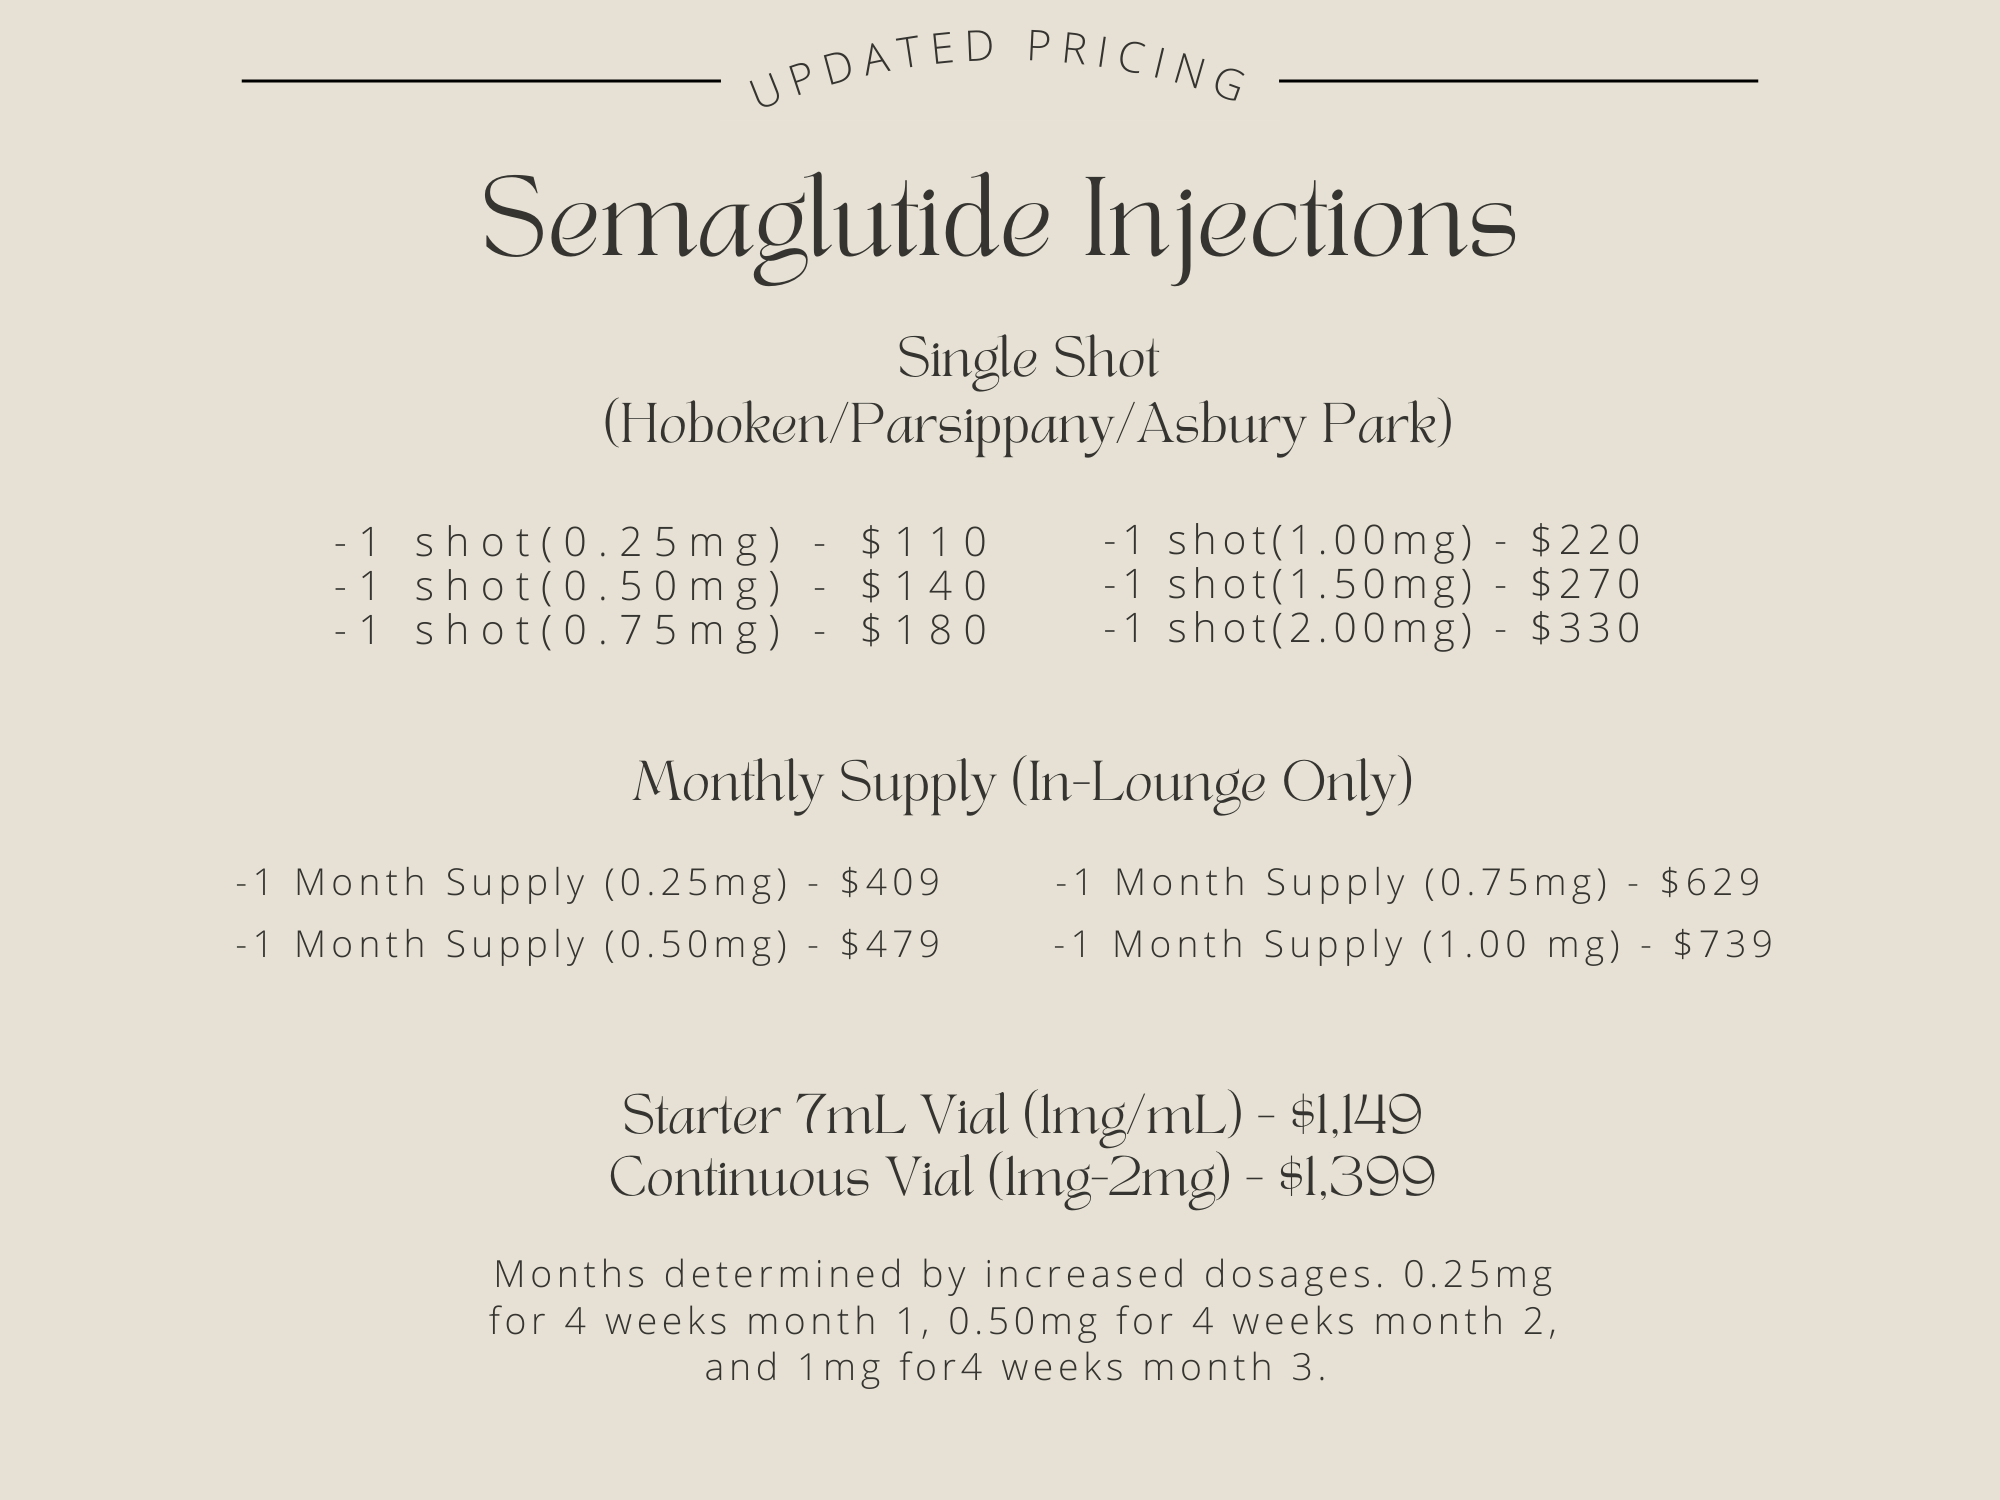 Updated pricing for Semaglutide injections at IV Elements